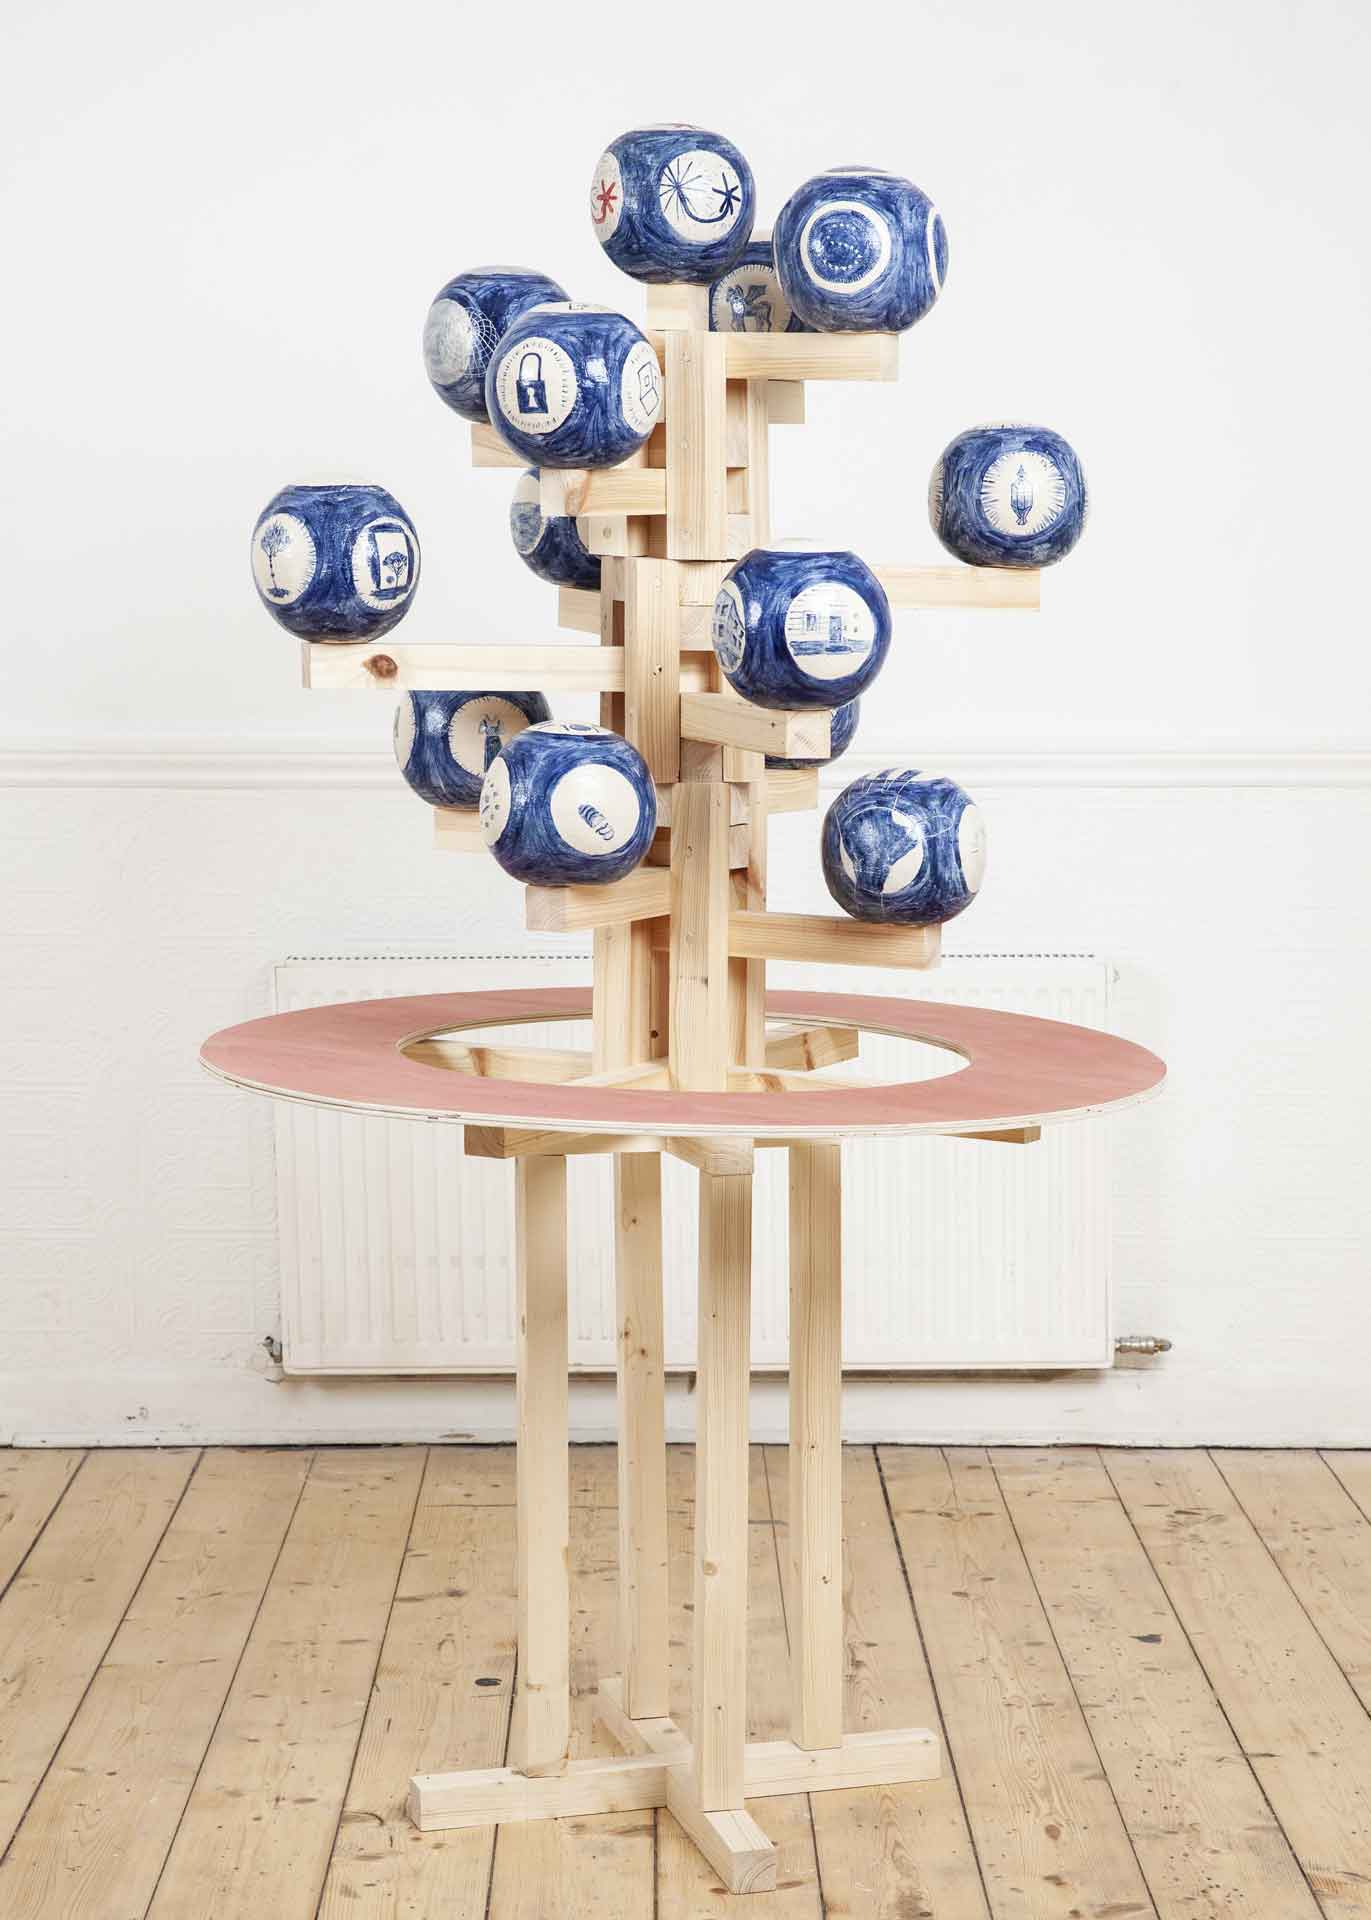 Blue and white ceramic spheres assembled on a wooden frame not unlike a christmass tree, inside a white gallery space with unvarnished wooden floors. 